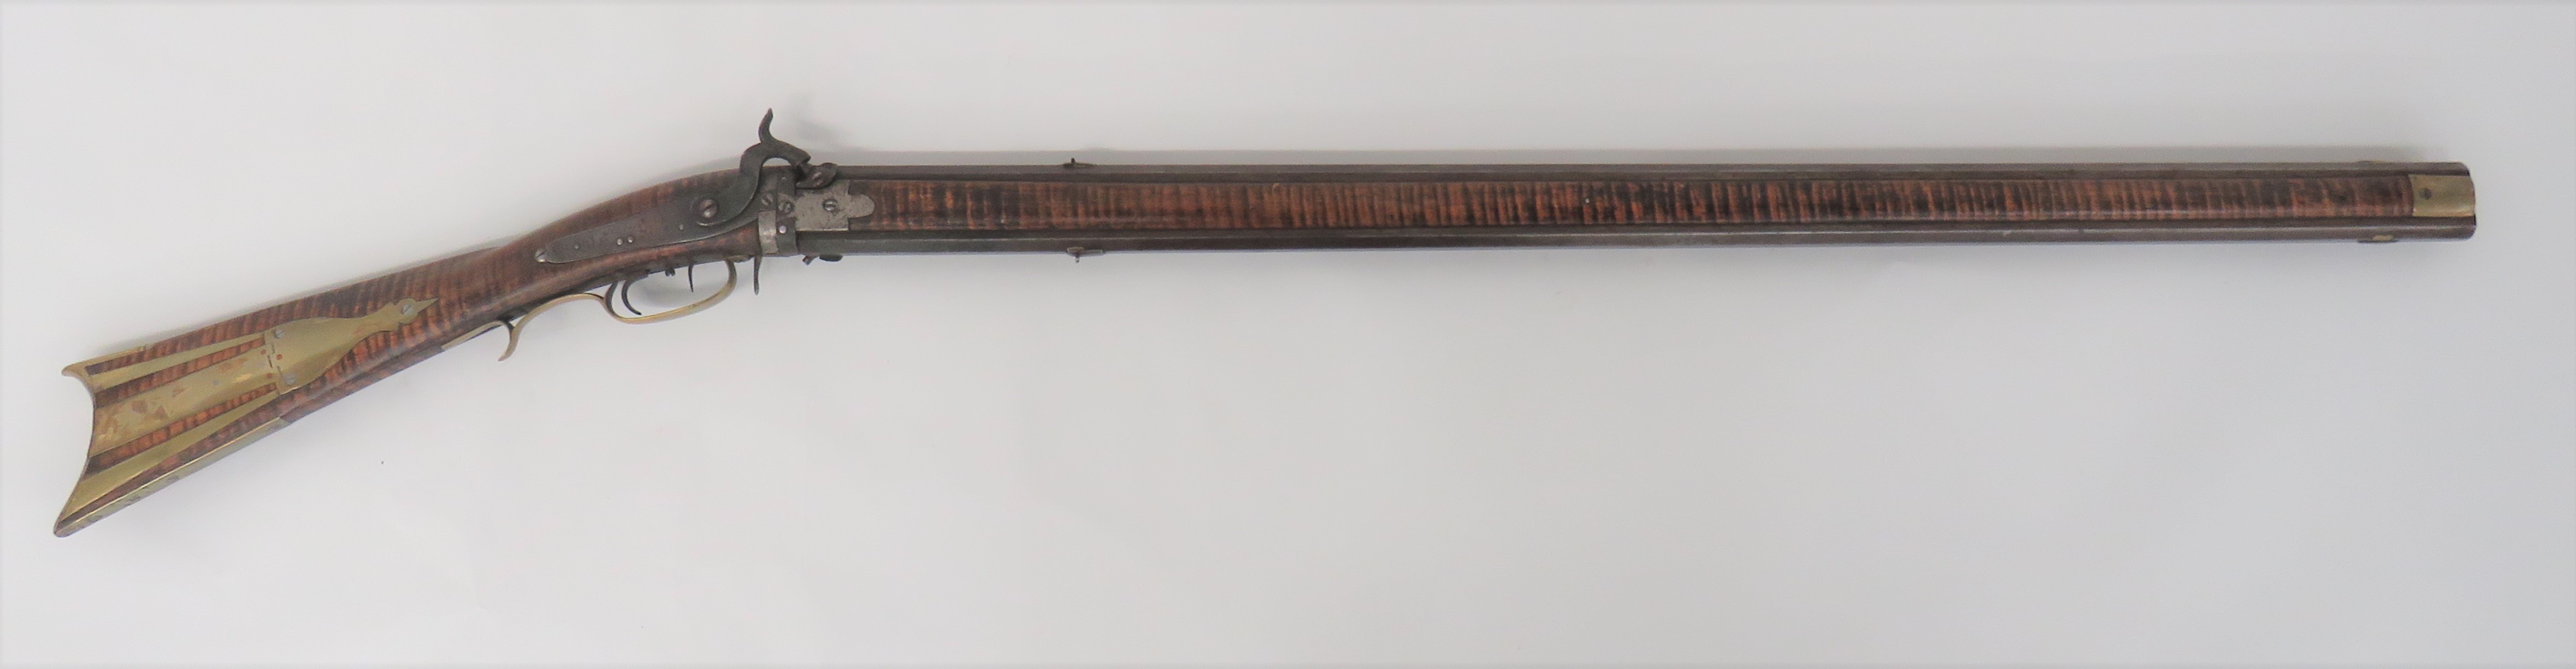 Rare American Plains Double Barrel Over and Under Percussion Rifle 80 bore, 36 1/2 inch, browned,